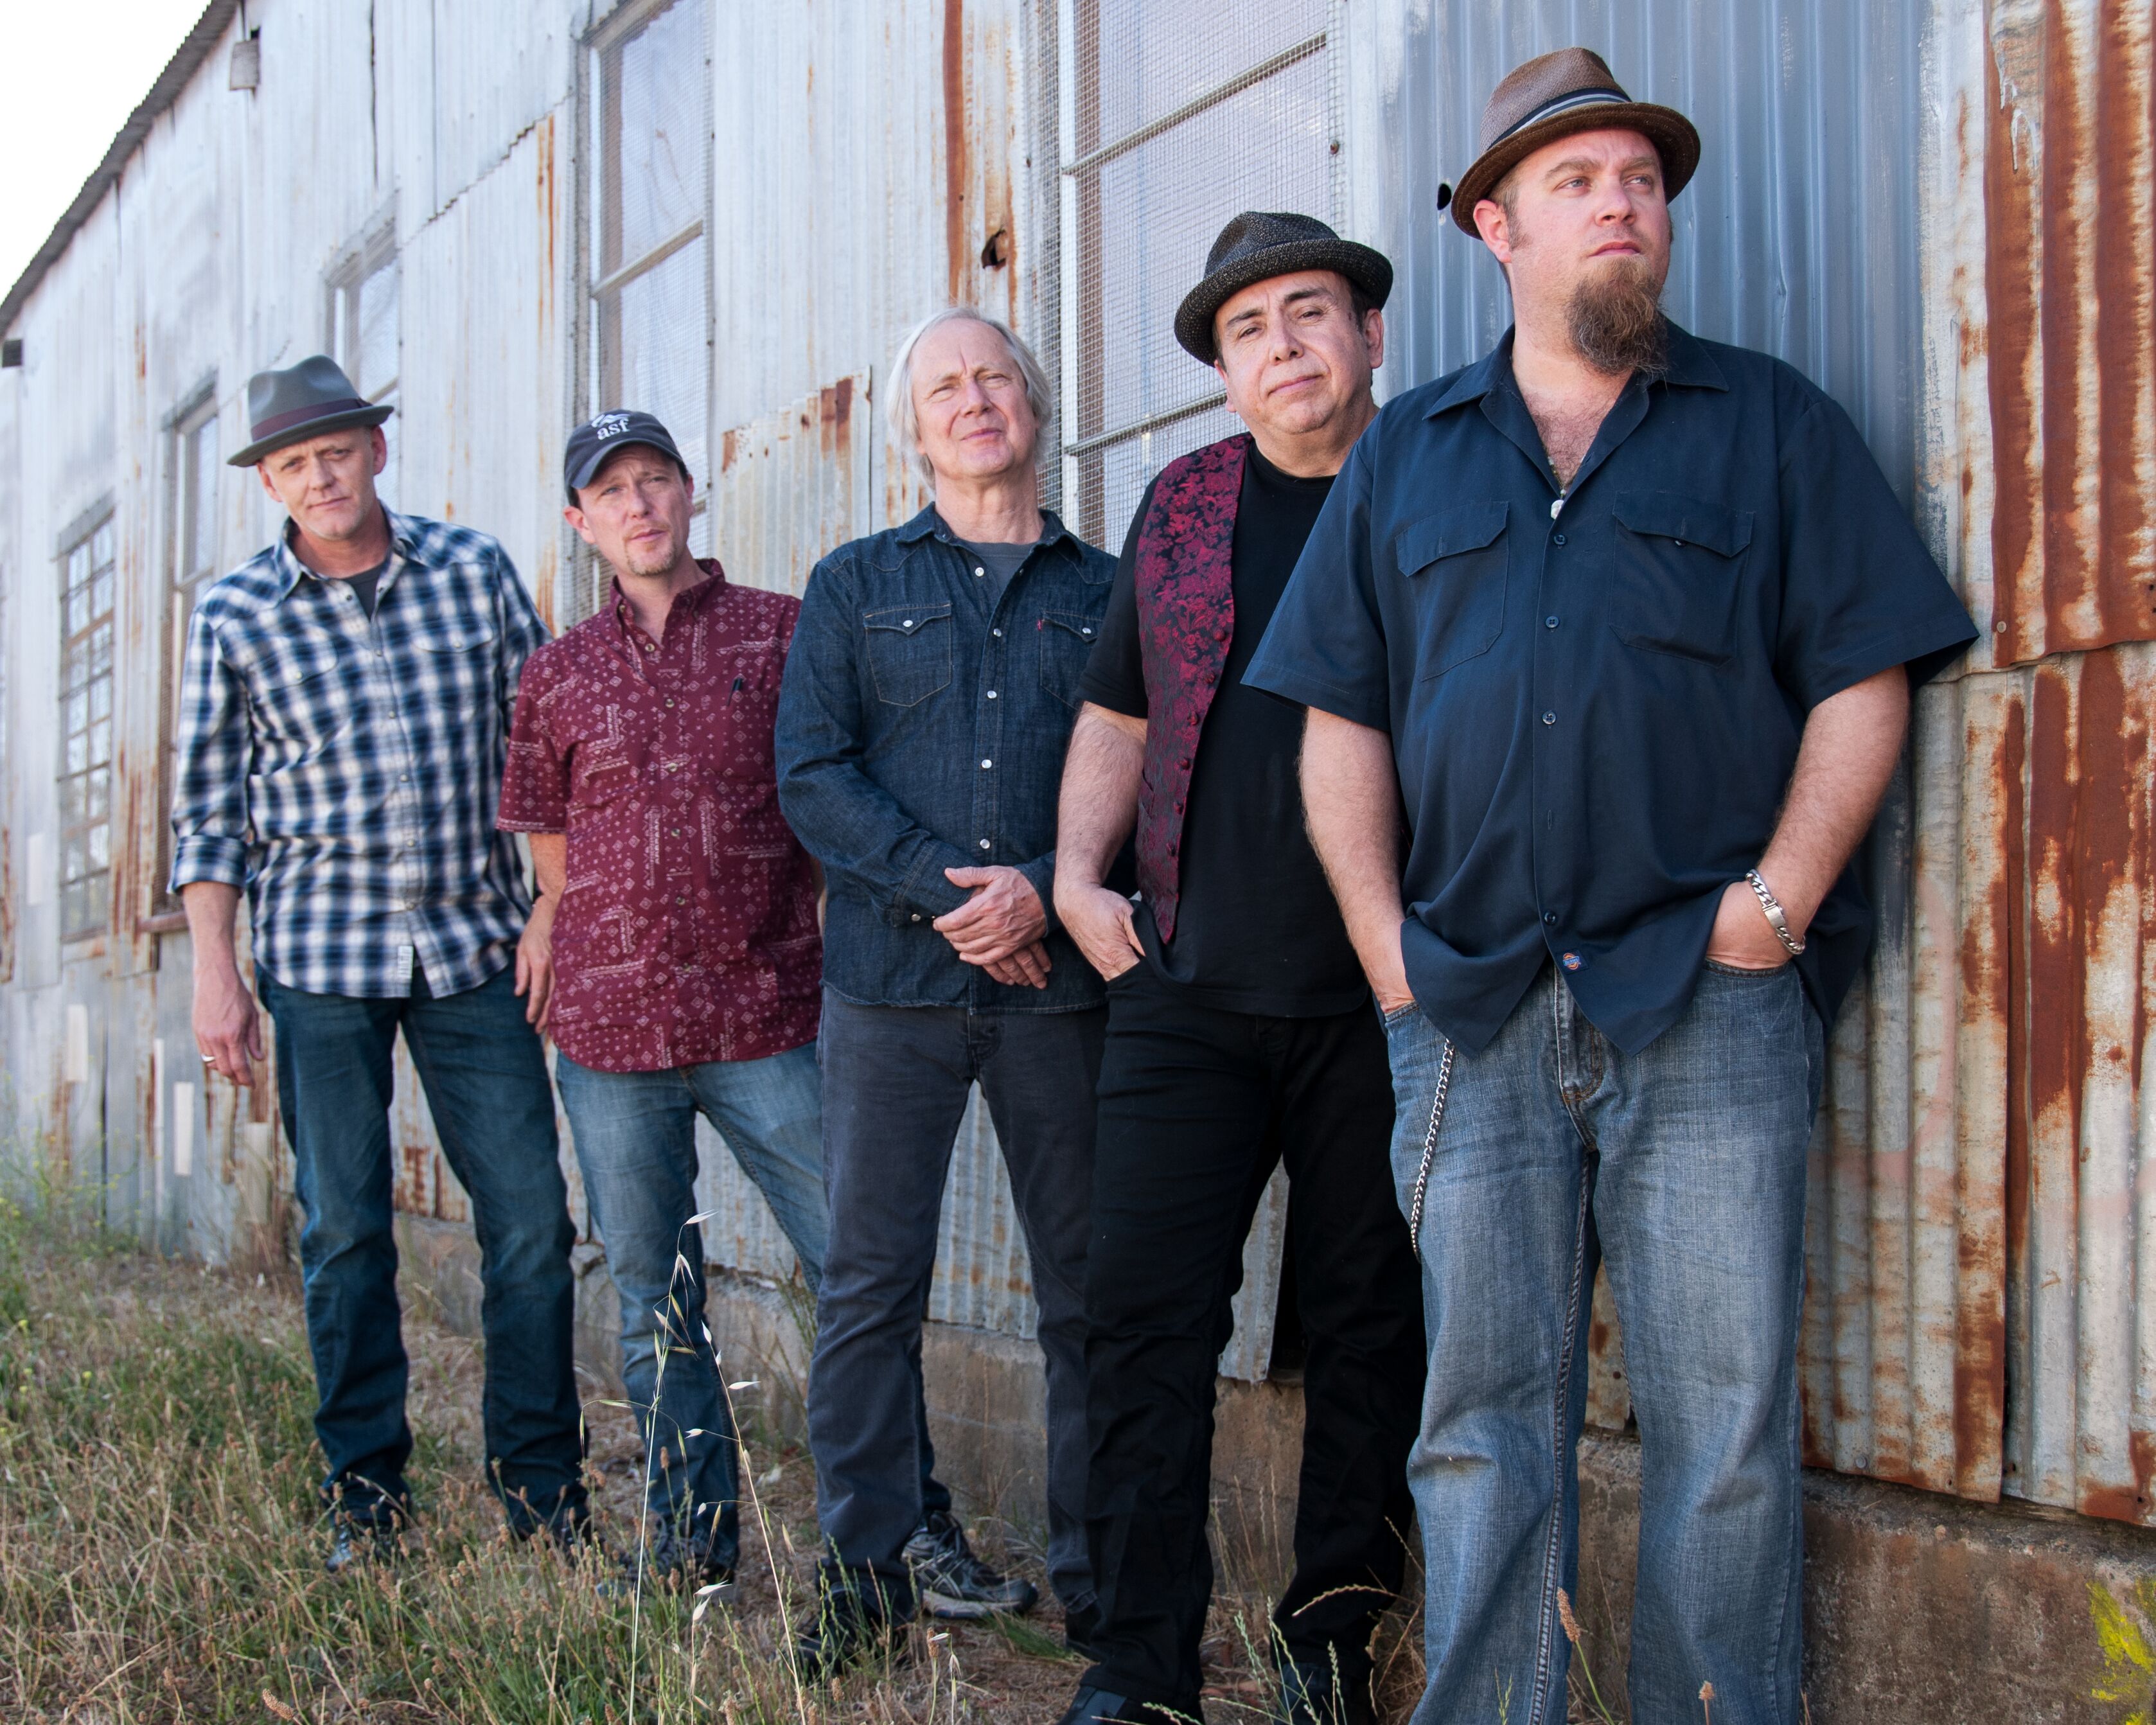 The Weight Band (feat. members of The Band & the Levon Helm Band) Performs @ Capitol Theatre, Friday December 20th